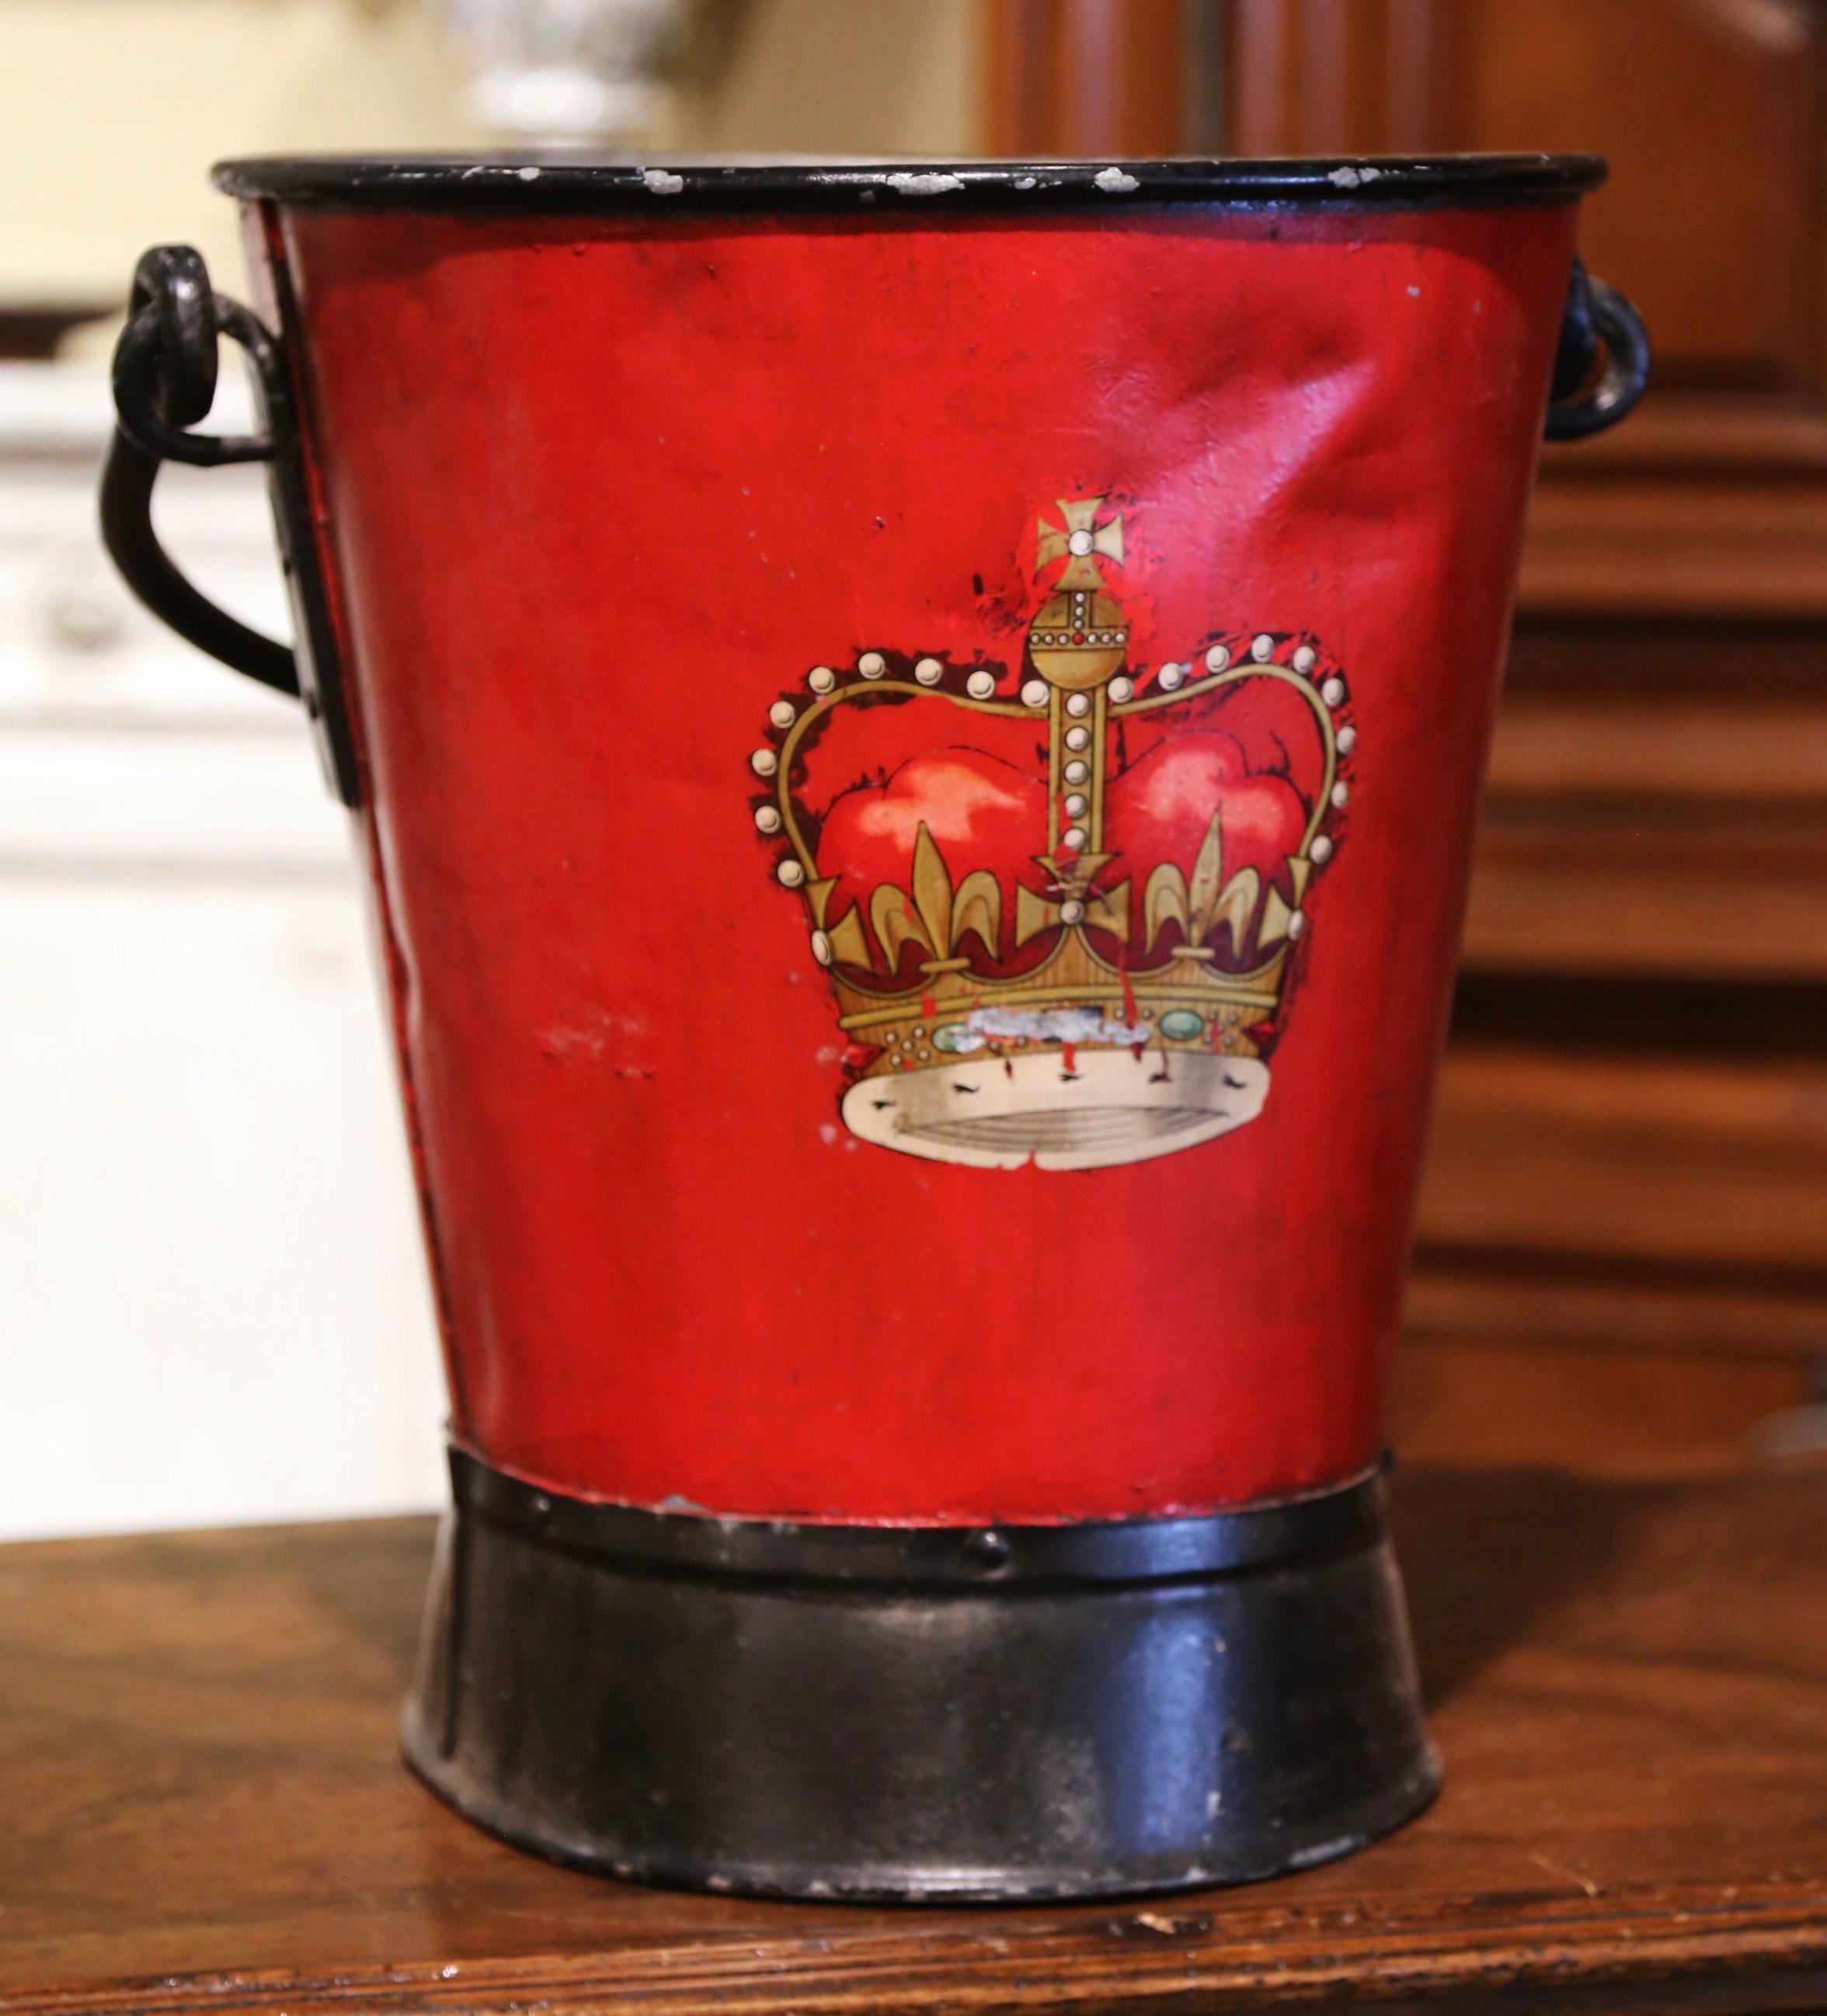 Place this large, colorful antique stand at your front door or in your mudroom to collect umbrellas, canes or other accessories. Created in England, circa 1890, the iron bucket with top and side handles, is decorated with a coat of arms with crown